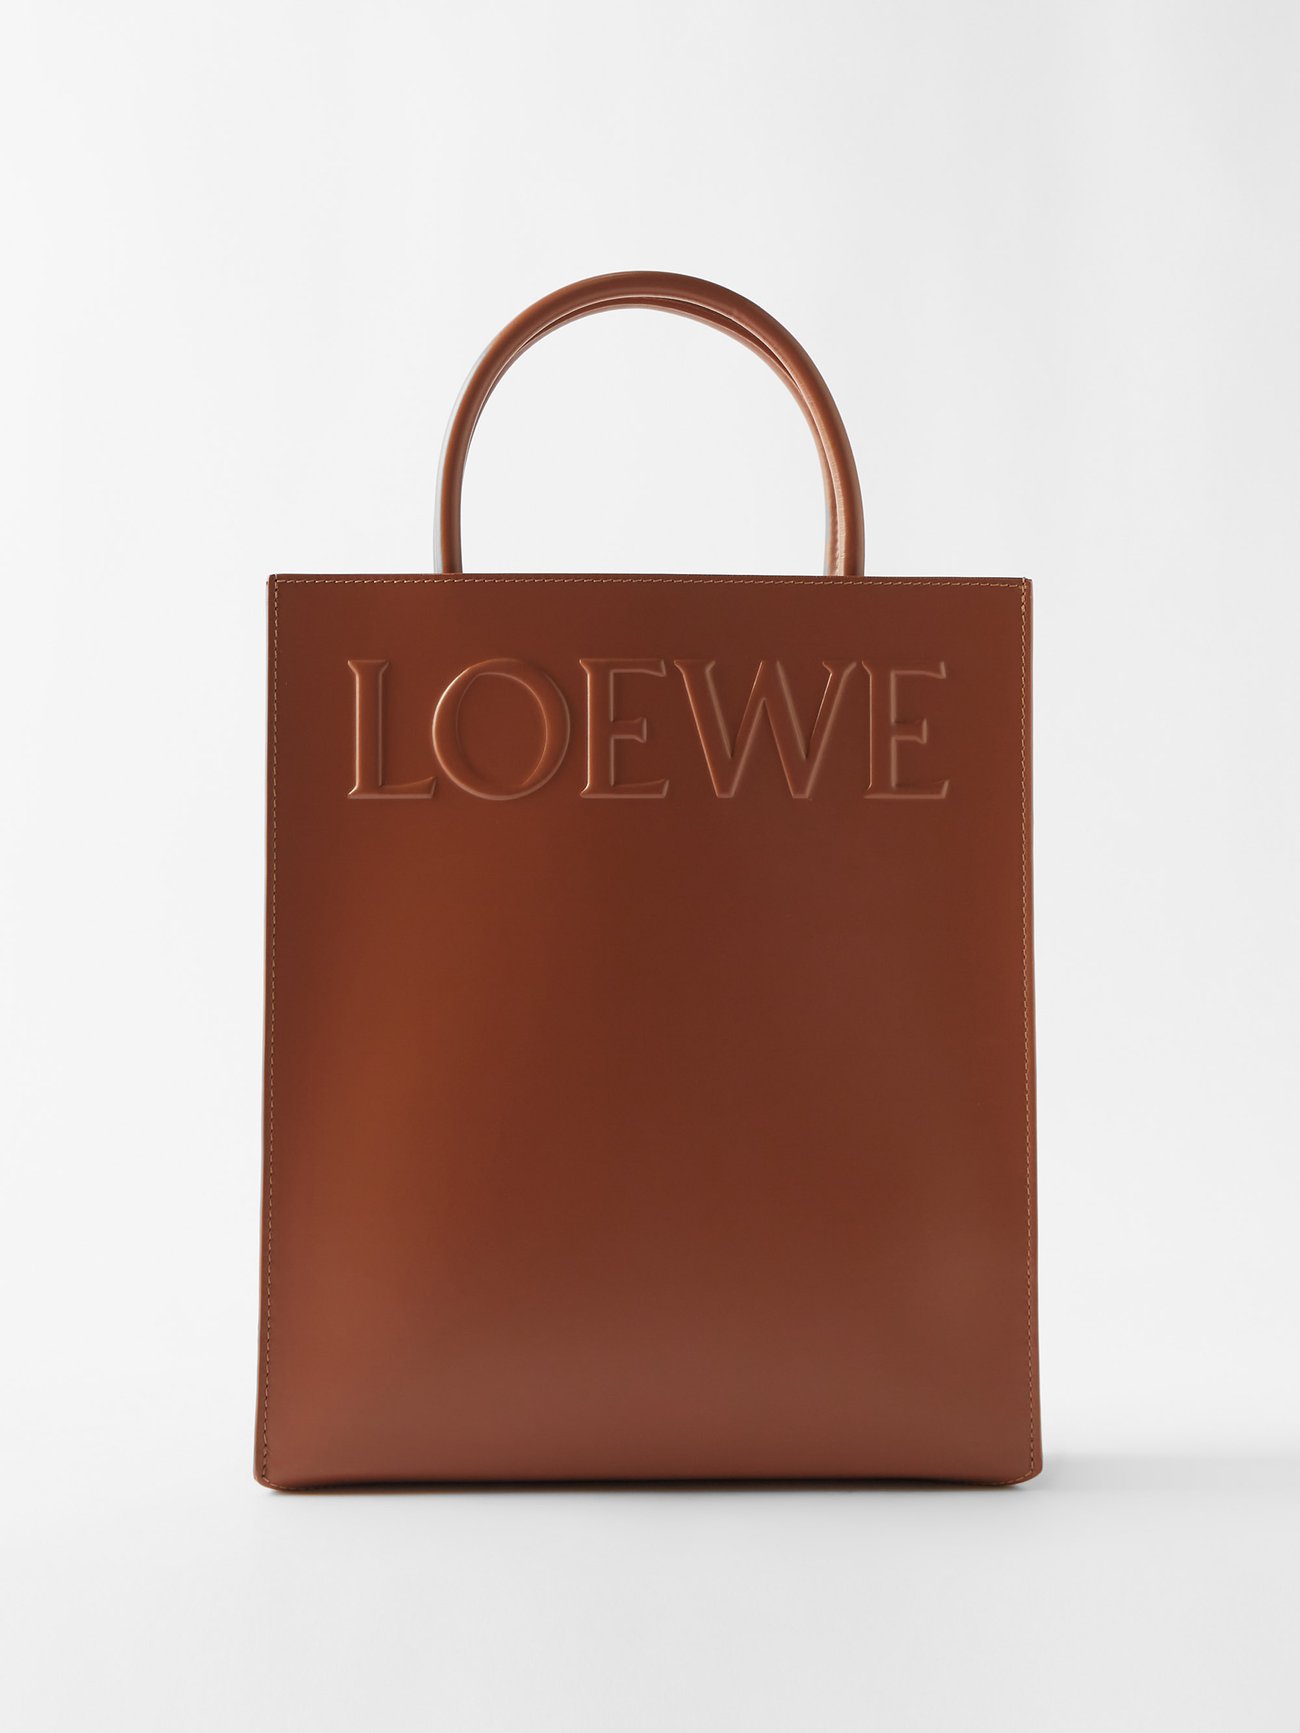 Tan A4 embossed-logo leather tote bag | LOEWE | MATCHES UK